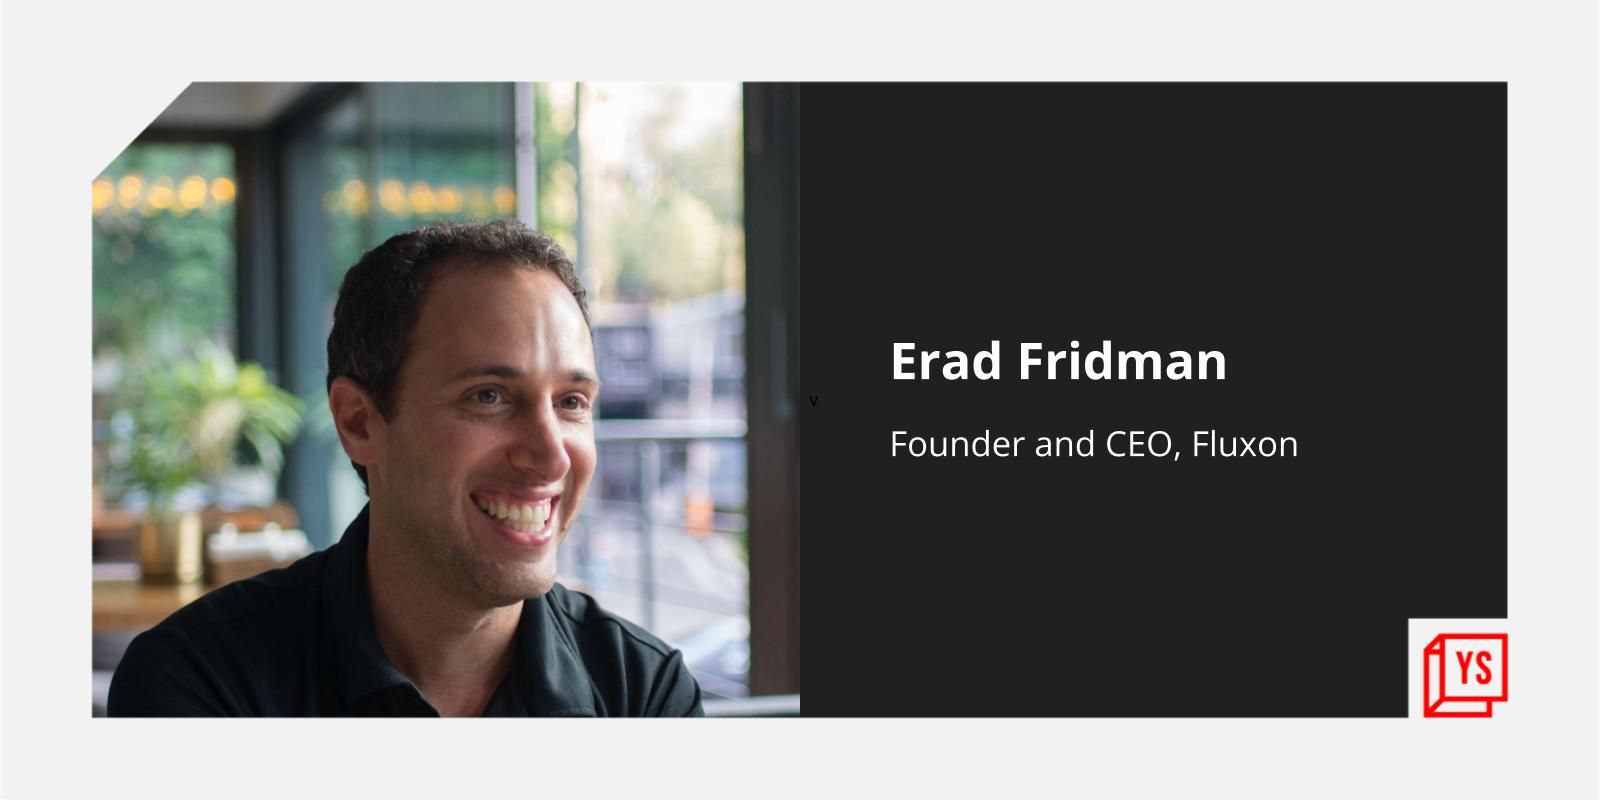 [Techie Tuesday] Meet Erad Fridman, an early product developer at Google who started coding when he was six 